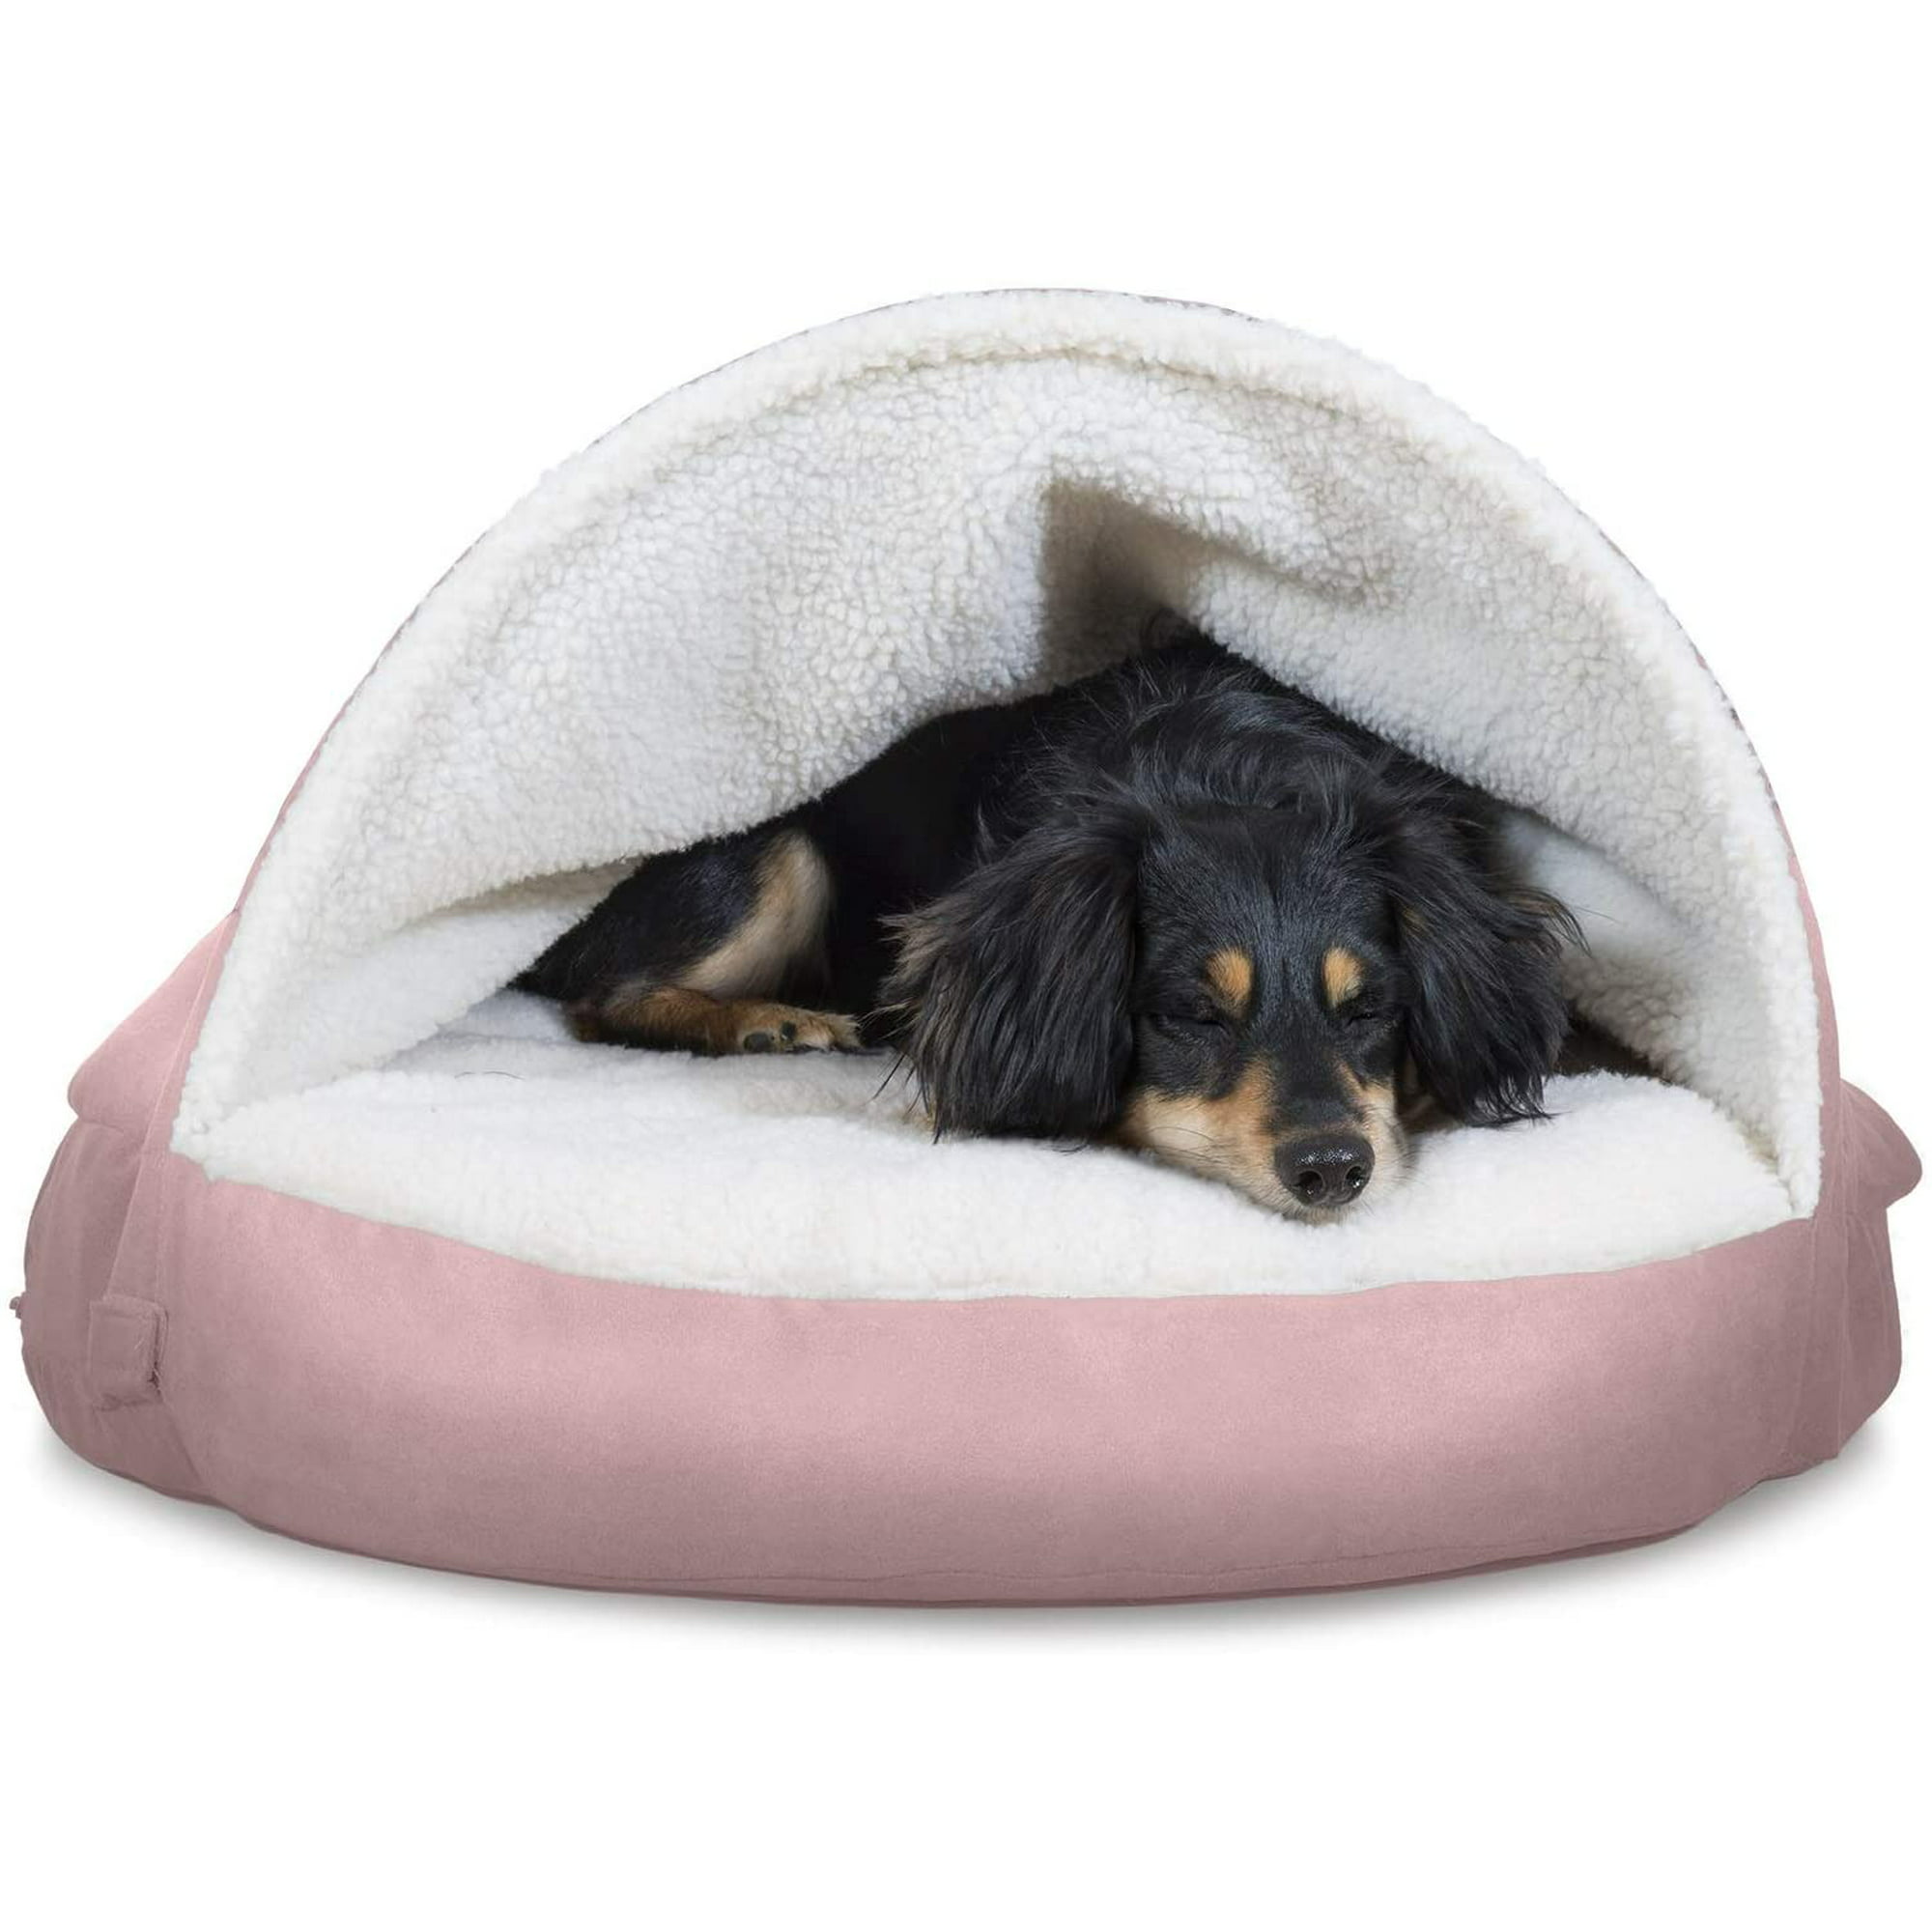 Pet Circular Burrowing Cave Hooded Pillow Bed Anti Anxiety Wrap Around Dog Bed For Dogs And Cats Walmart Canada